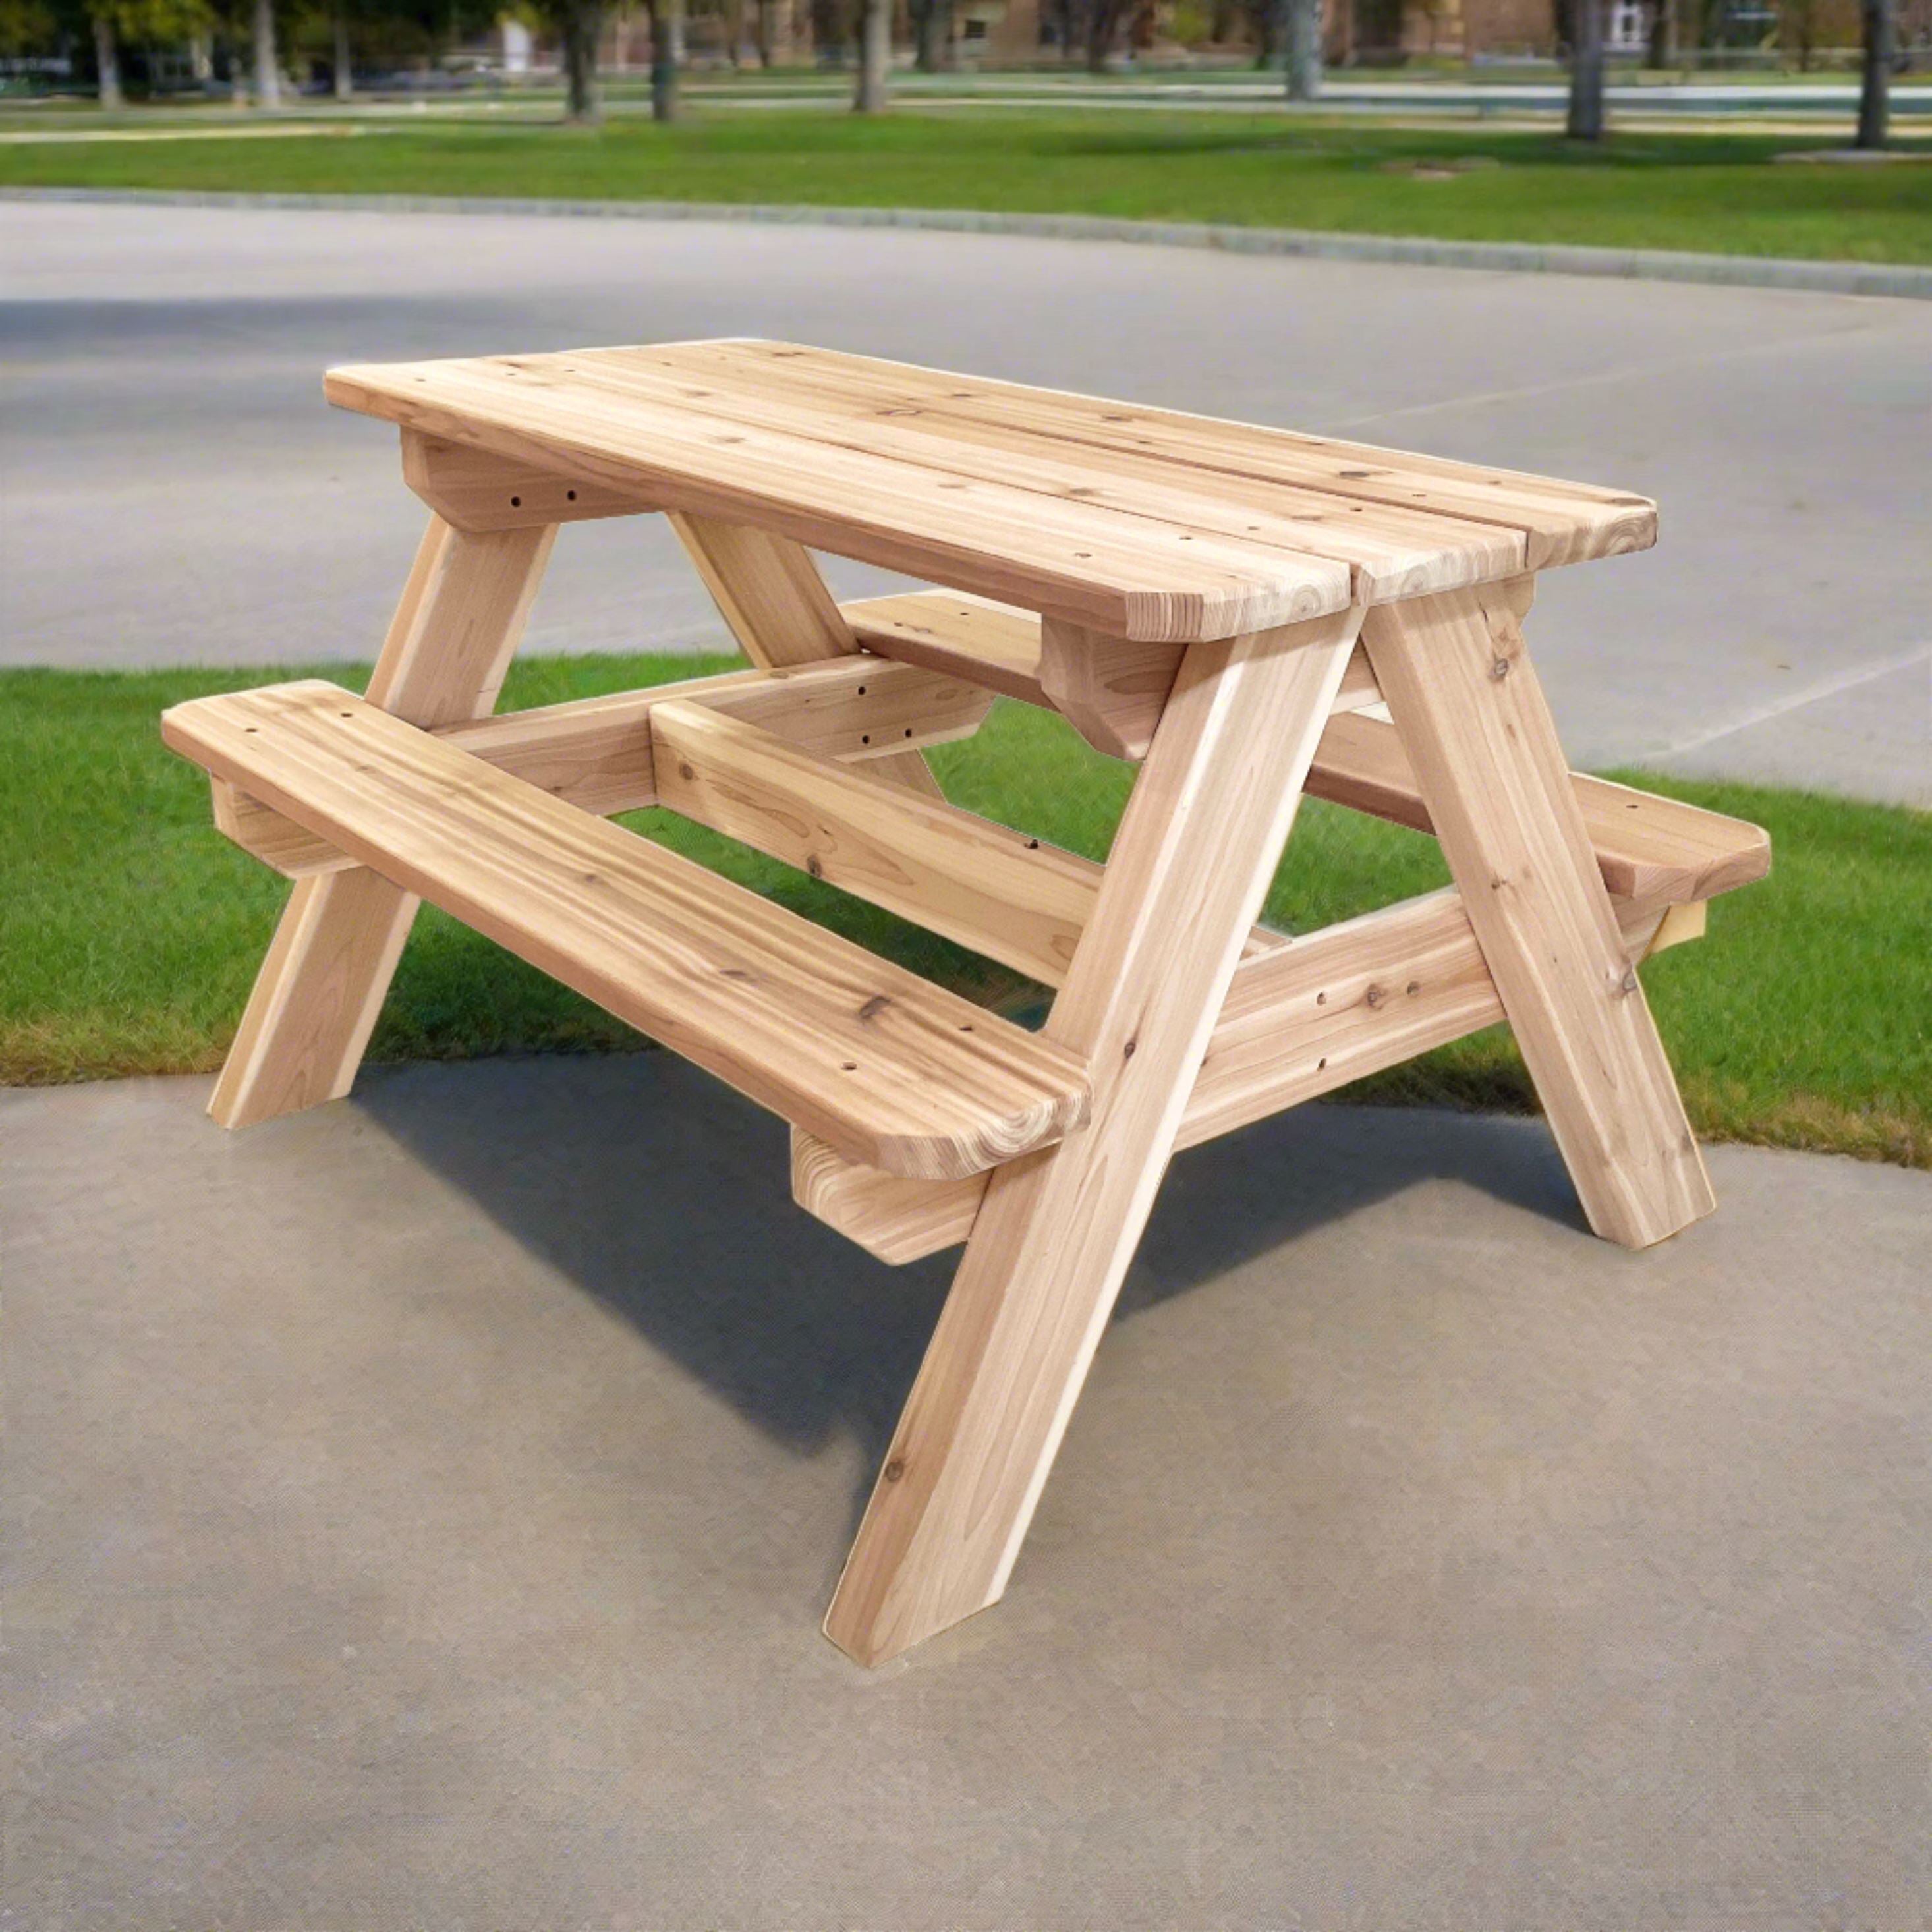 Cedar Picnic Table Furnishings Louise Kool for child care day care primary classrooms